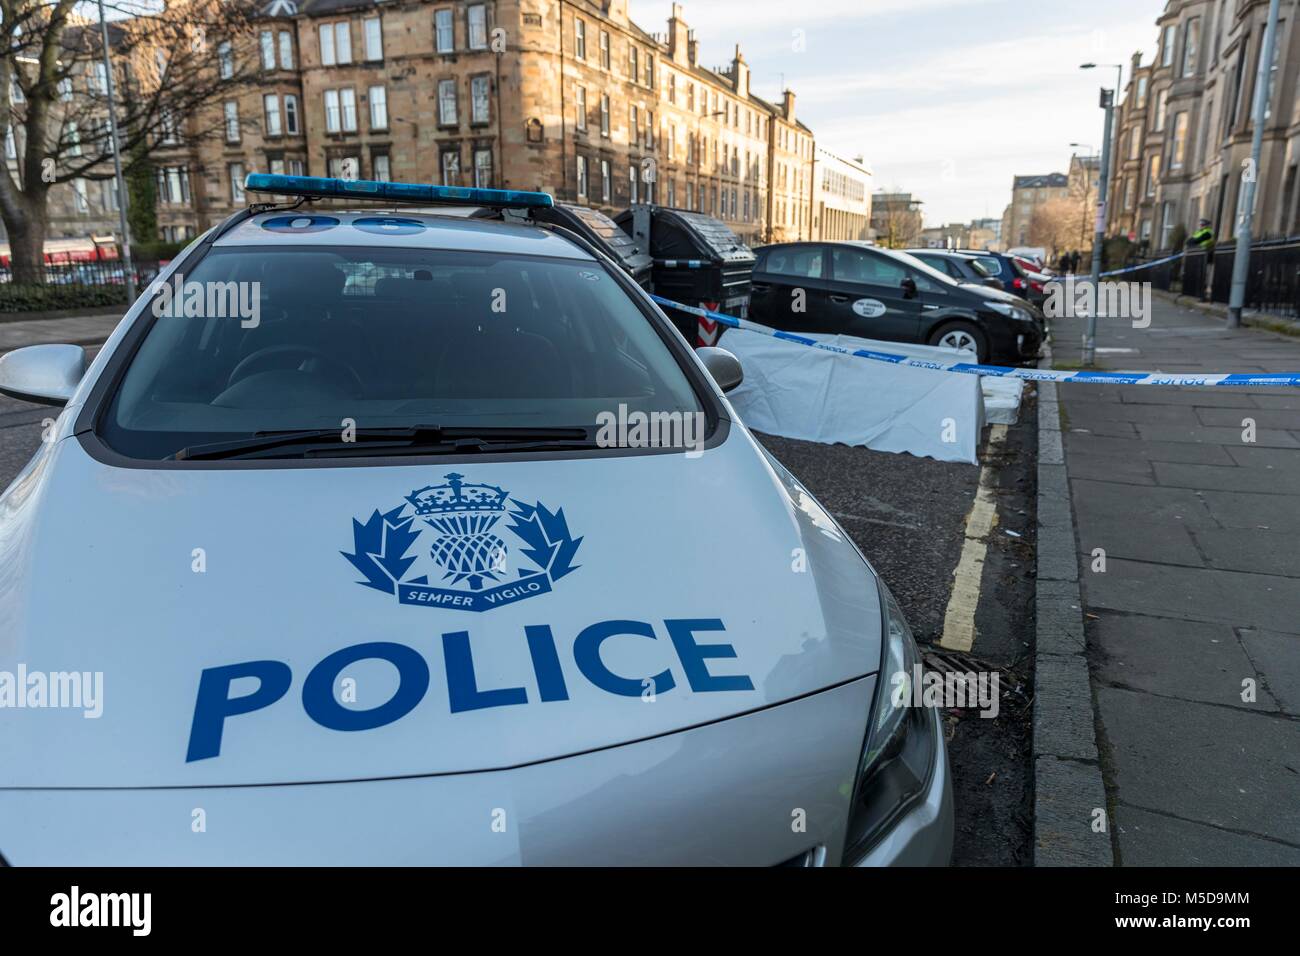 Edinburgh, UK. 22nd February, 2018. Police in Edinburgh are currently in attendance following the discovery of a man's body in East London Street.   The incident was reported to police and emergency services around 7.45am on Thursday, February 22.   Inquiries are currently ongoing, and the death is being treated as unexplained. A report will be submitted to the Procurator Fiscal. Credit: Rich Dyson/Alamy Live News Stock Photo